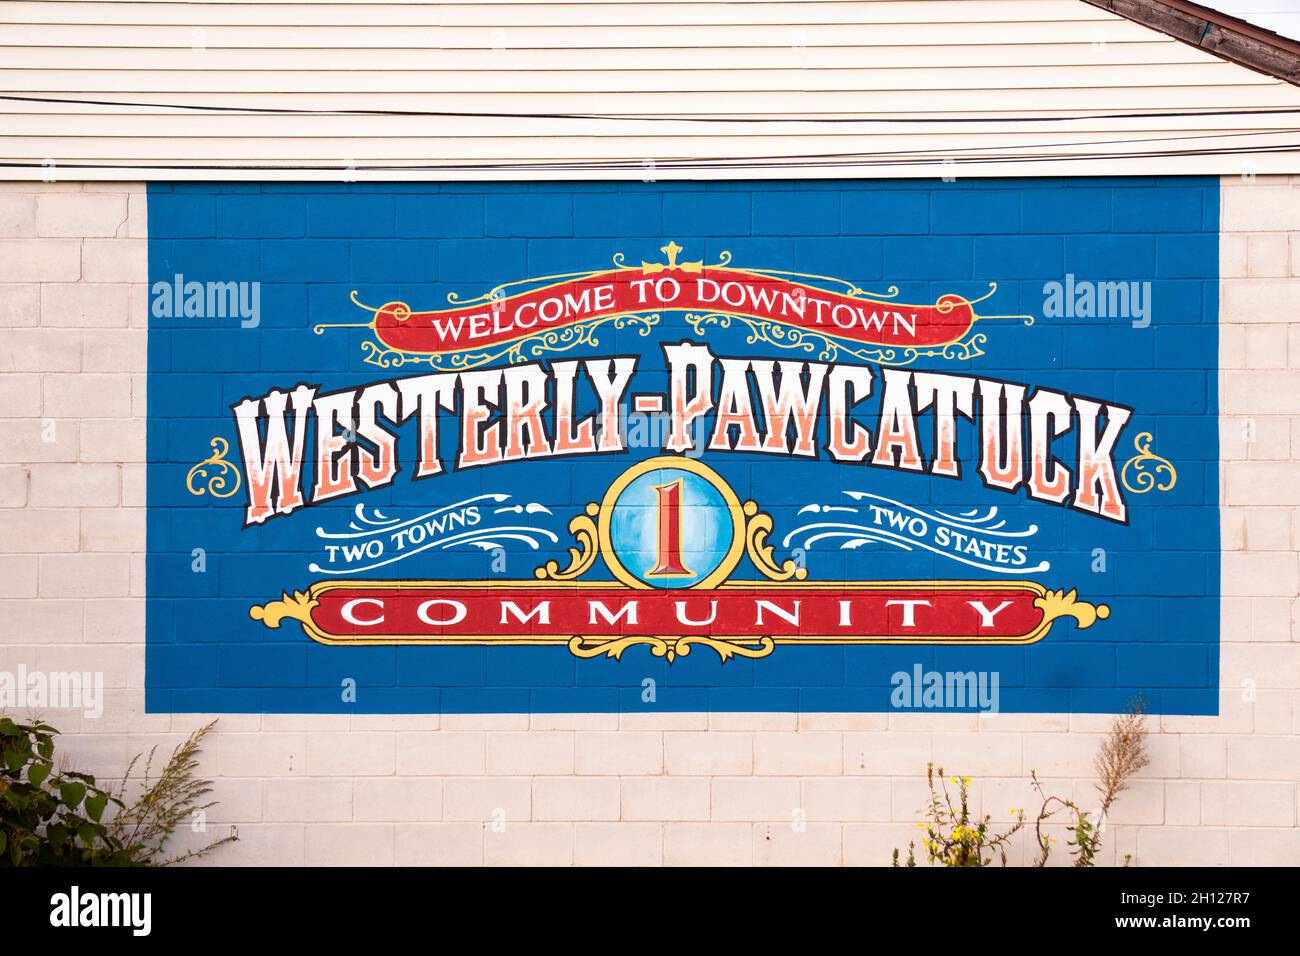 A sign in downtown Westerly Pawcatuck, a shopping area at the junction of 2 cities from 2 different states. Stock Photo